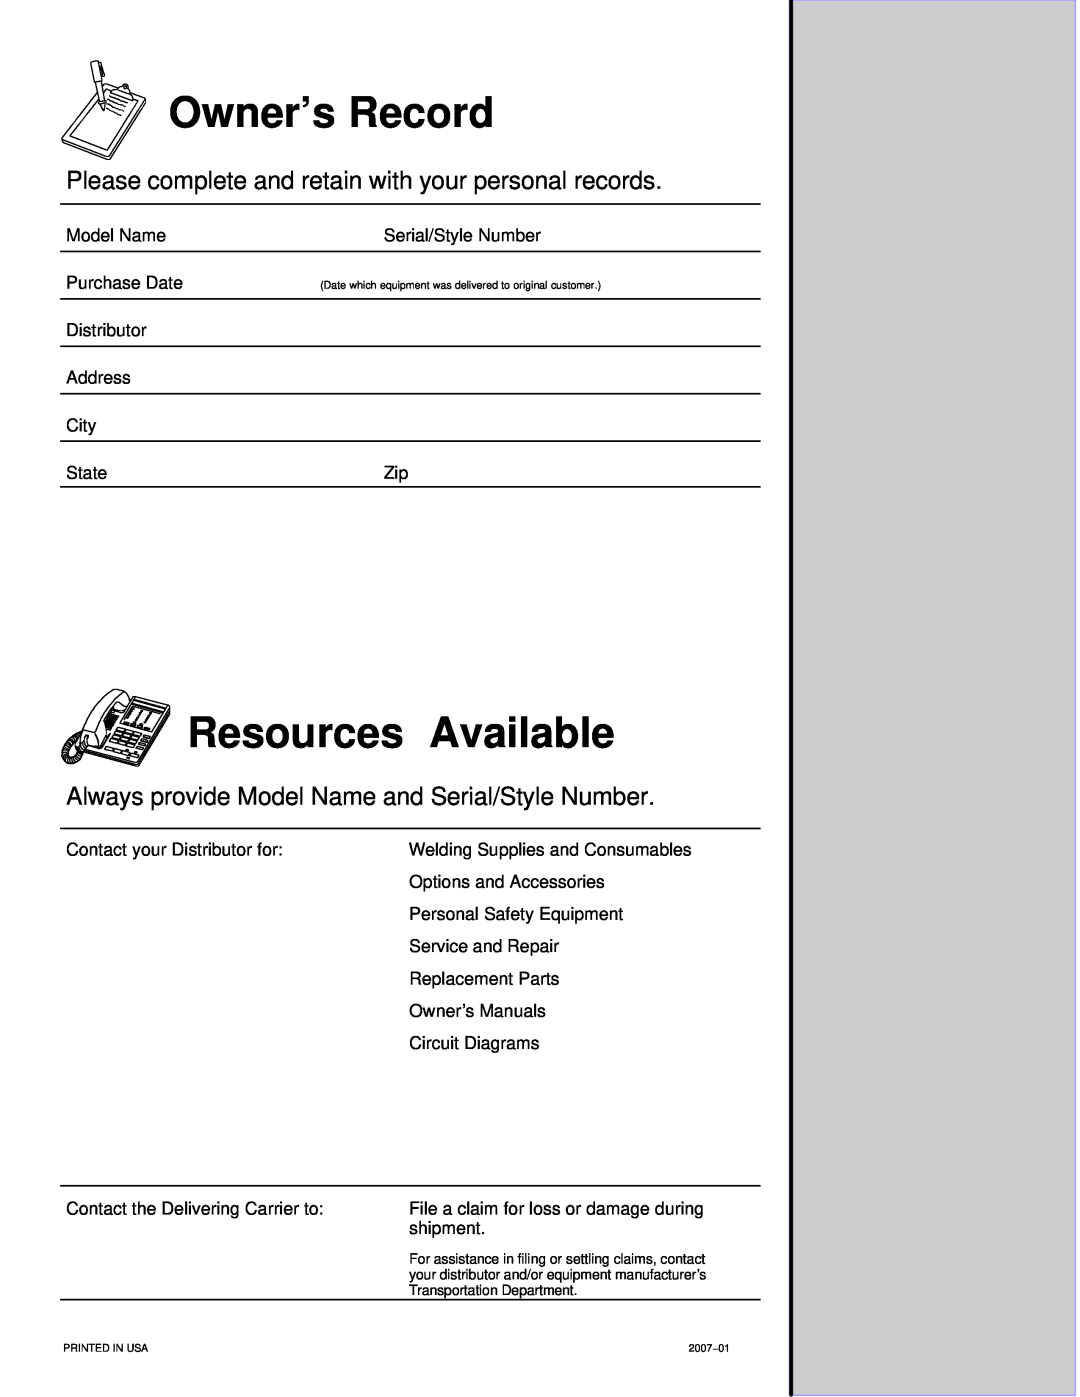 Miller Electric pmn warranty Owner’s Record, Resources Available, Please complete and retain with your personal records 